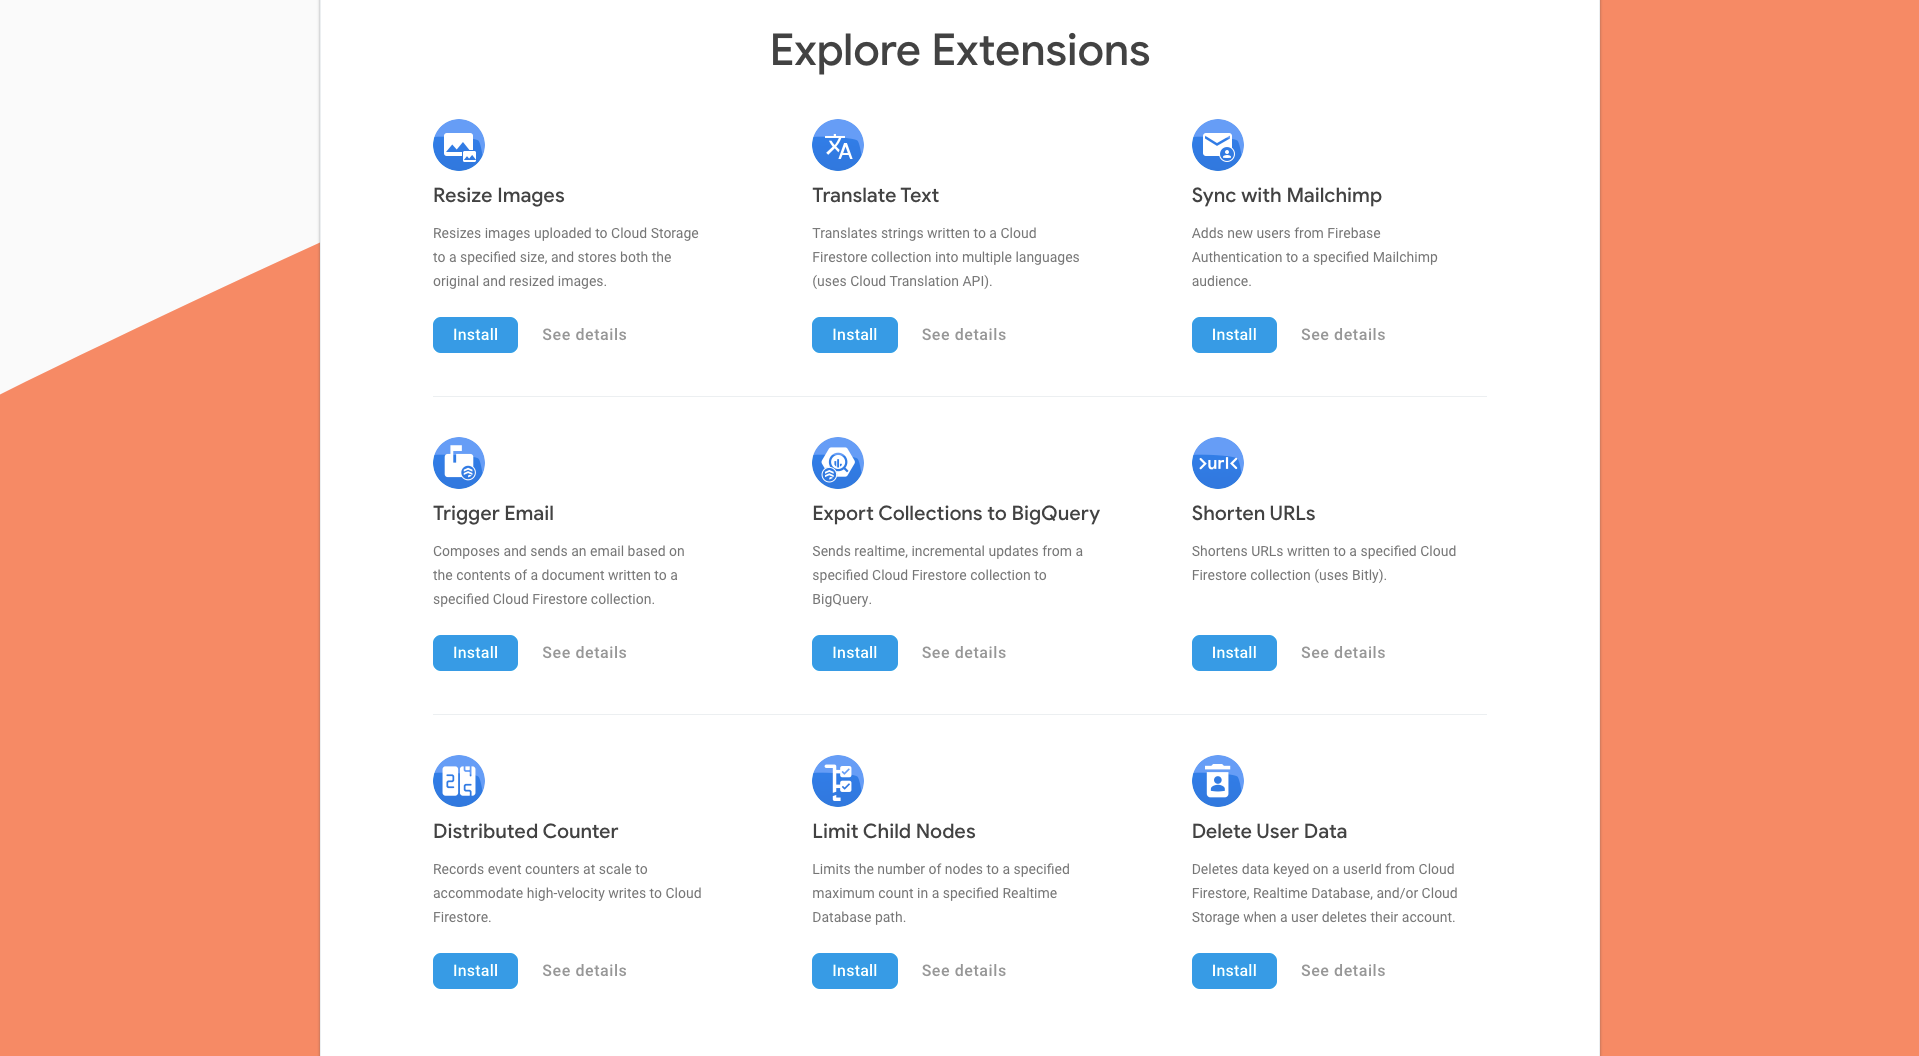 screencapture-firebase-google-products-extensions-2019-09-27-06_38_46.png